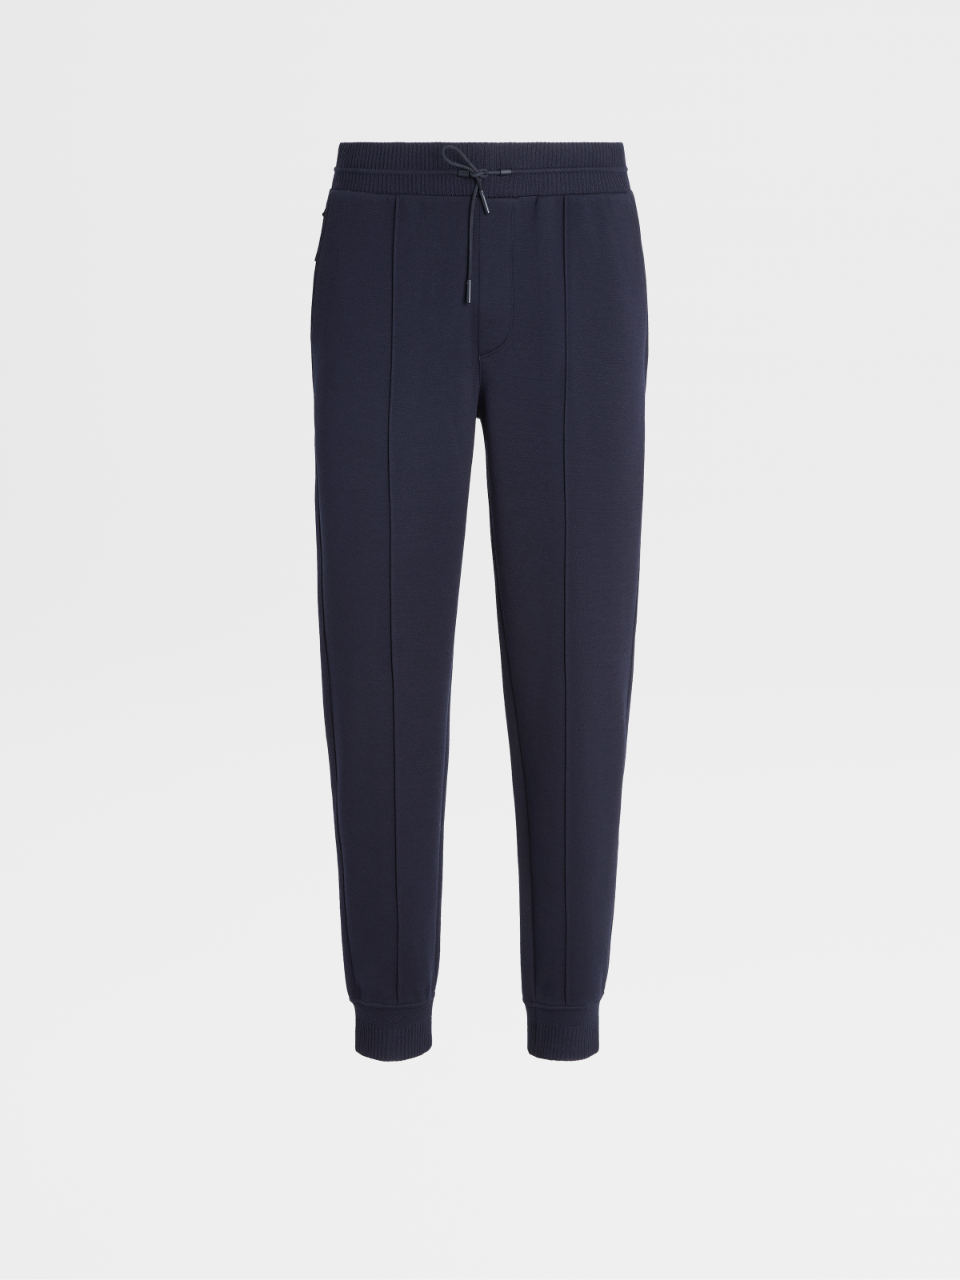 High Performance™ Wool and Spacer Cotton Sweatpants